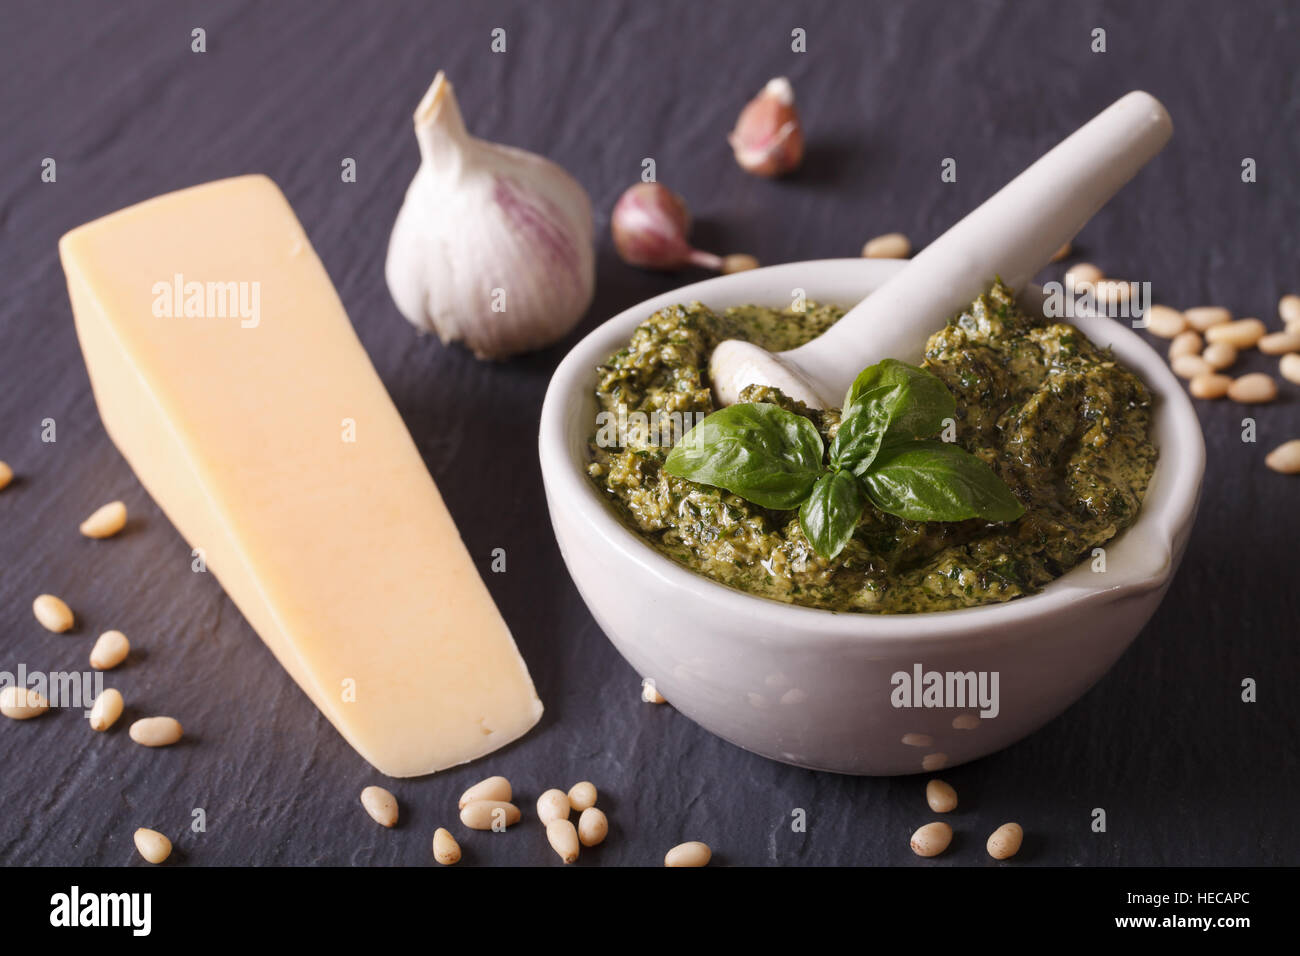 Italian green pesto sauce in a mortar and ingredients close-up on the table. Horizontal Stock Photo